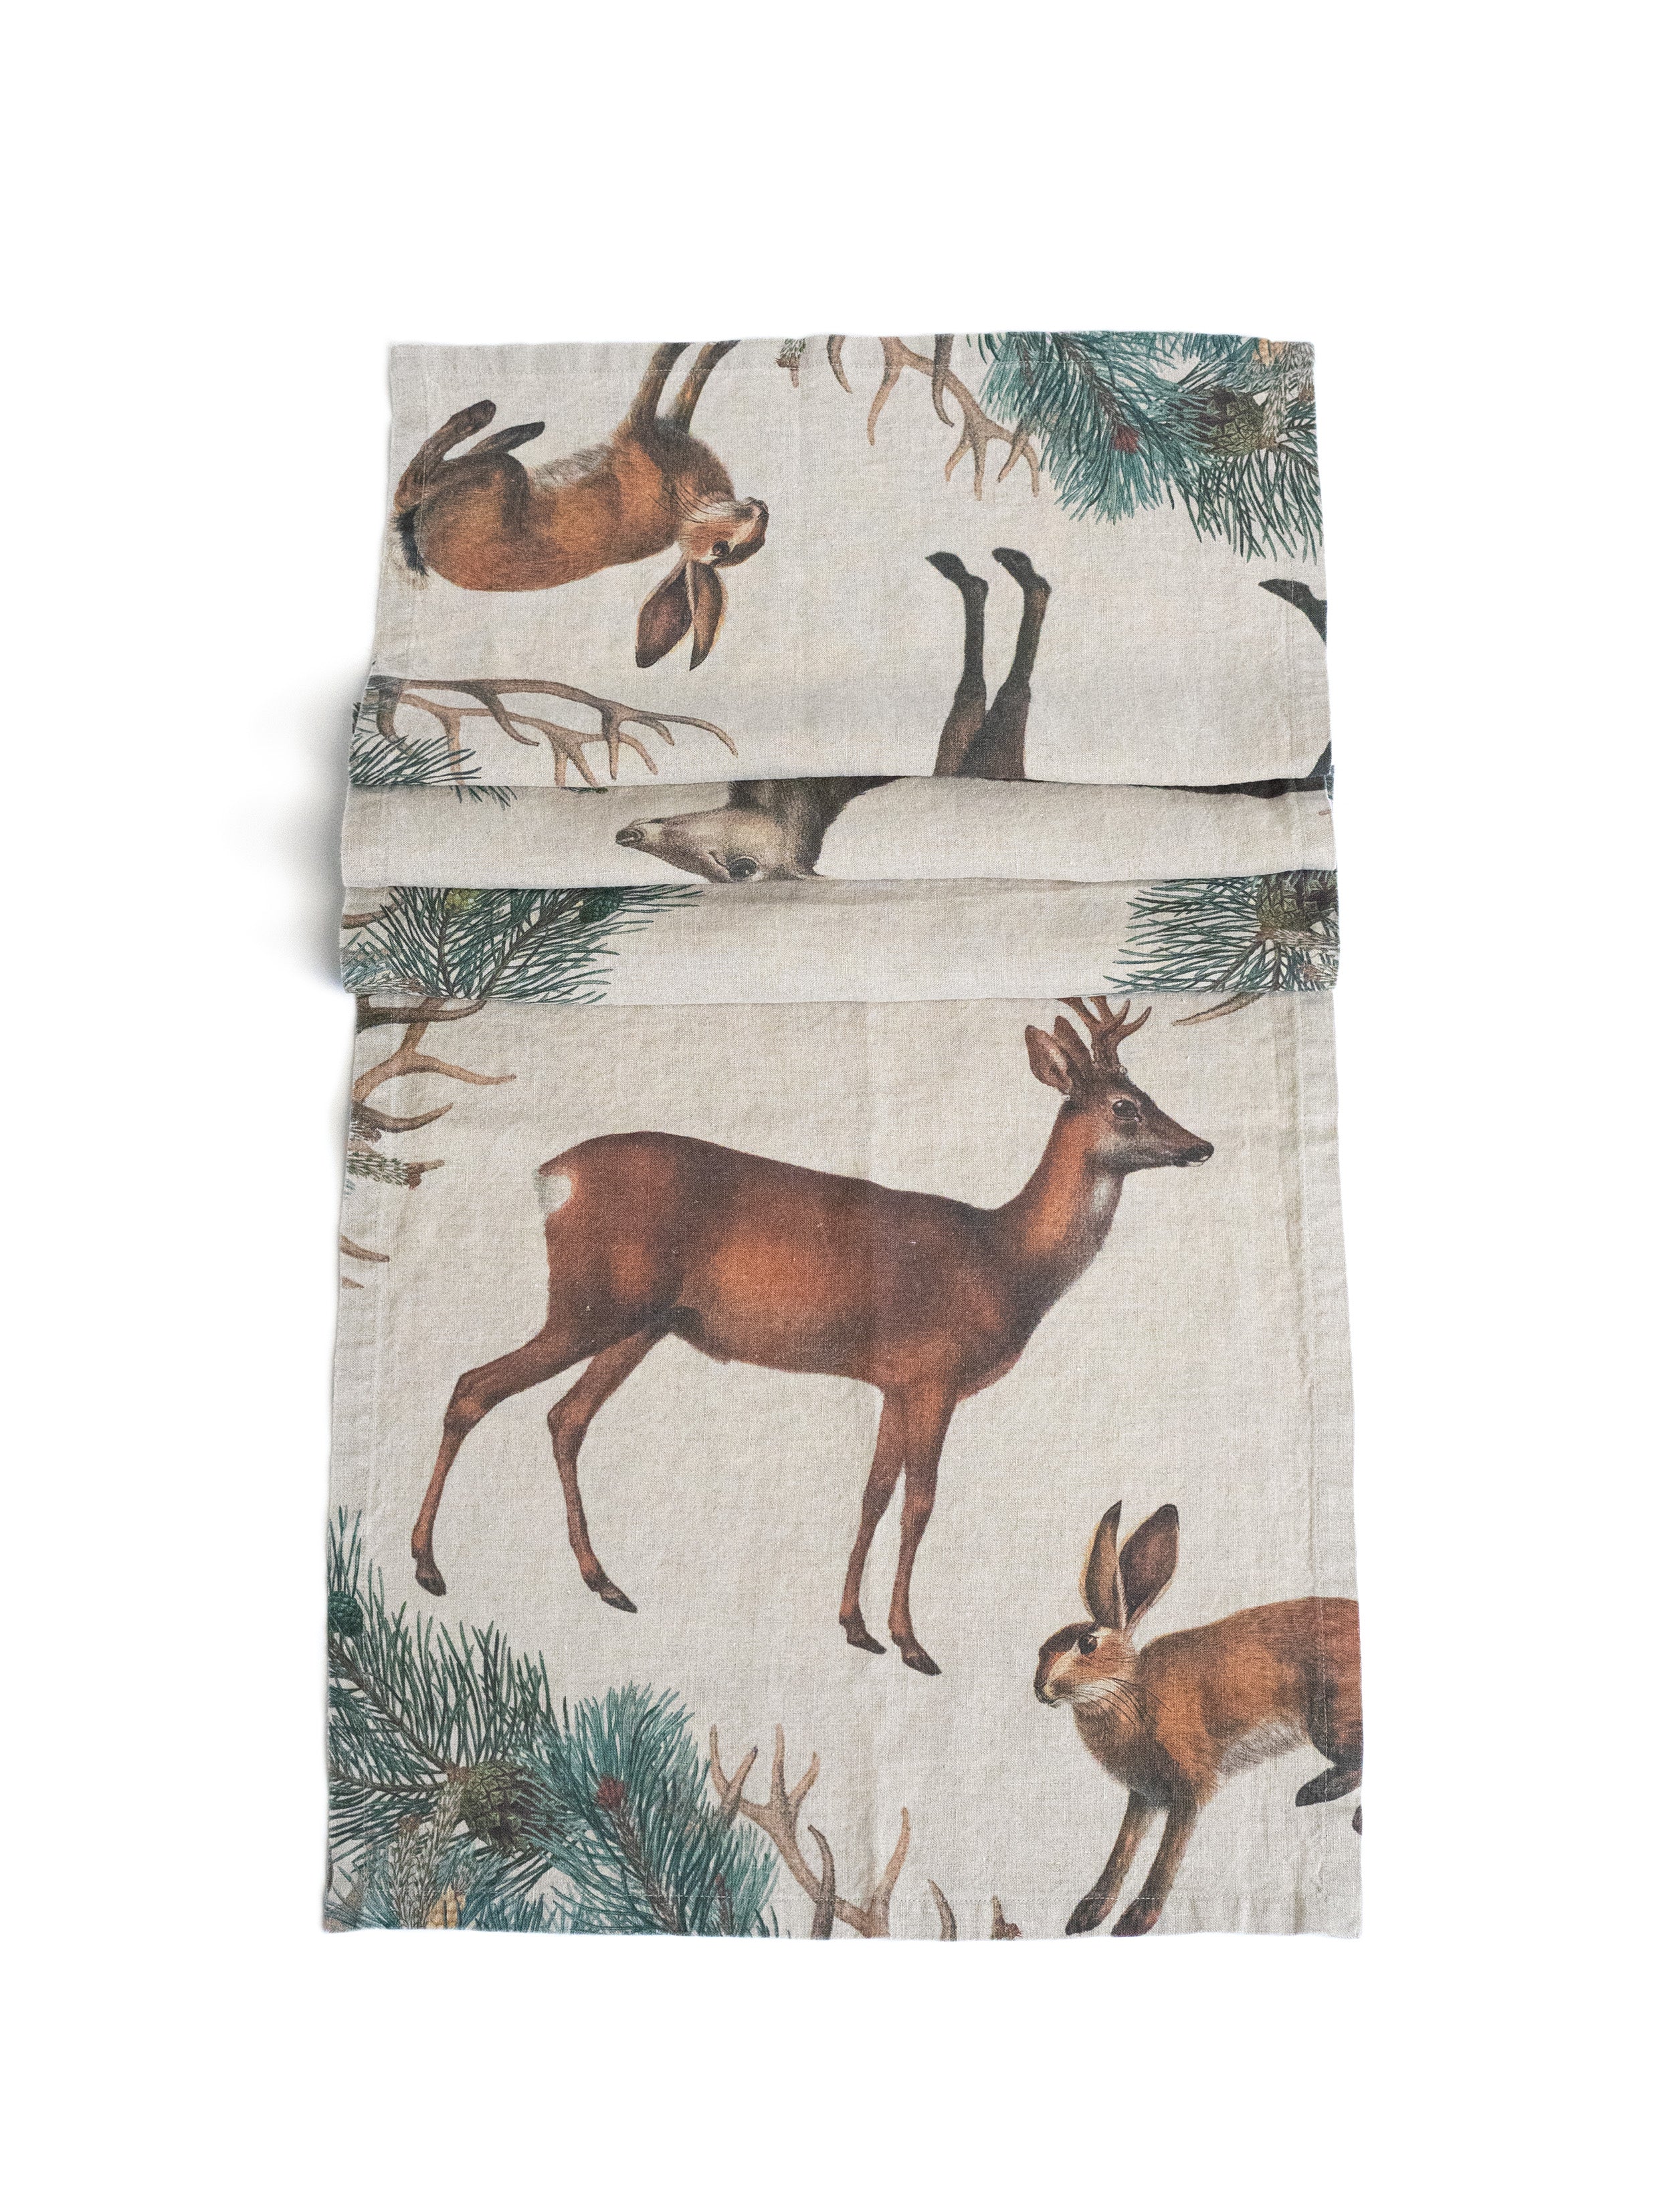 The Linoroom “Wild Animals,” Pure linen printed table runner.